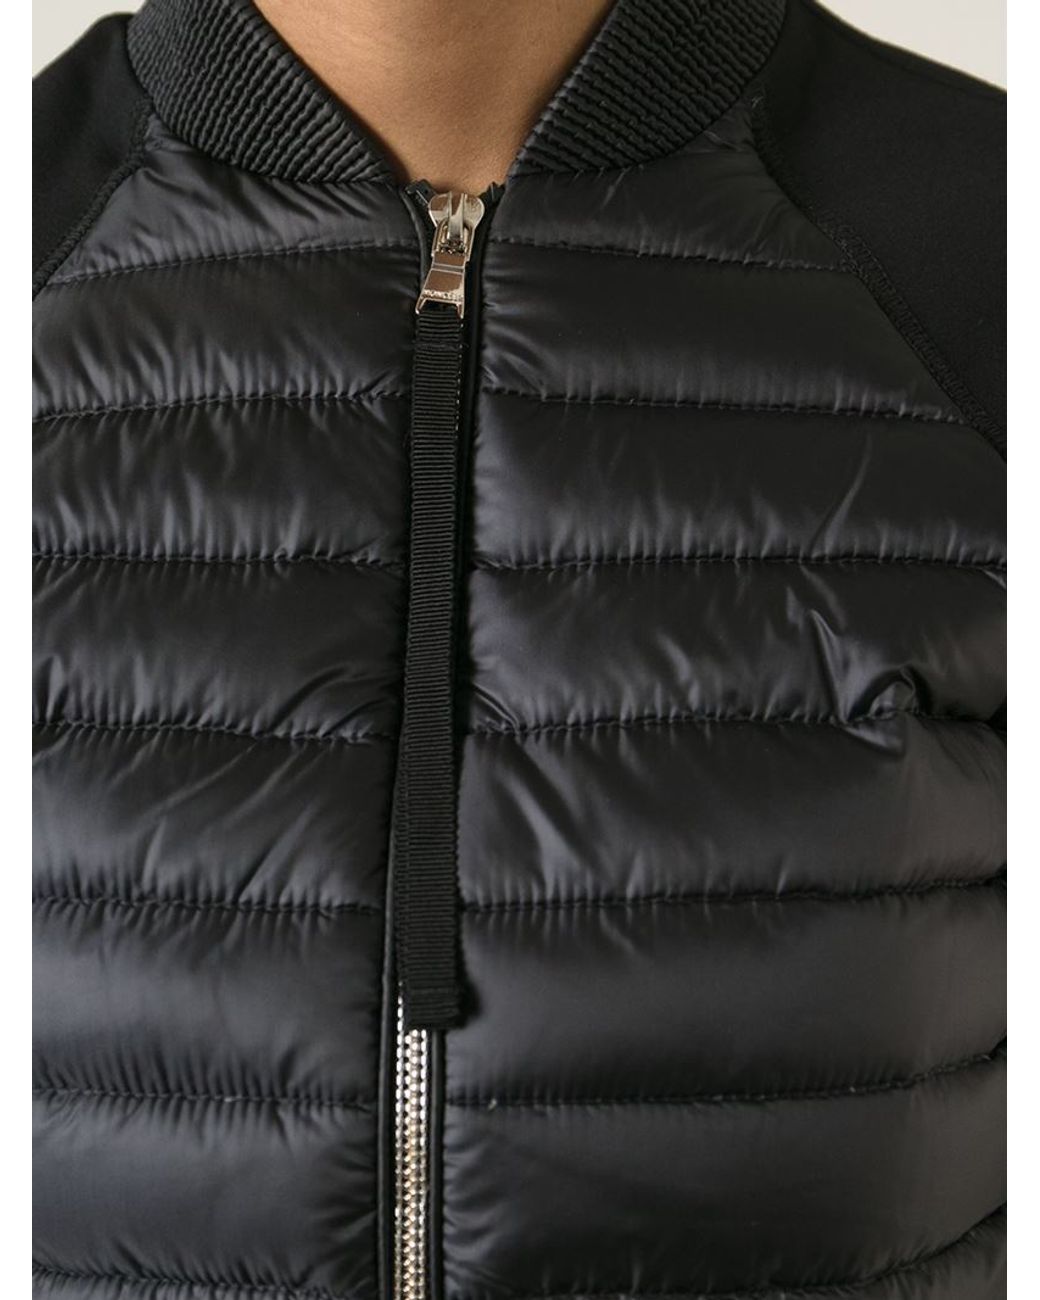 Moncler Short Sleeve Quilted Jacket in Black | Lyst